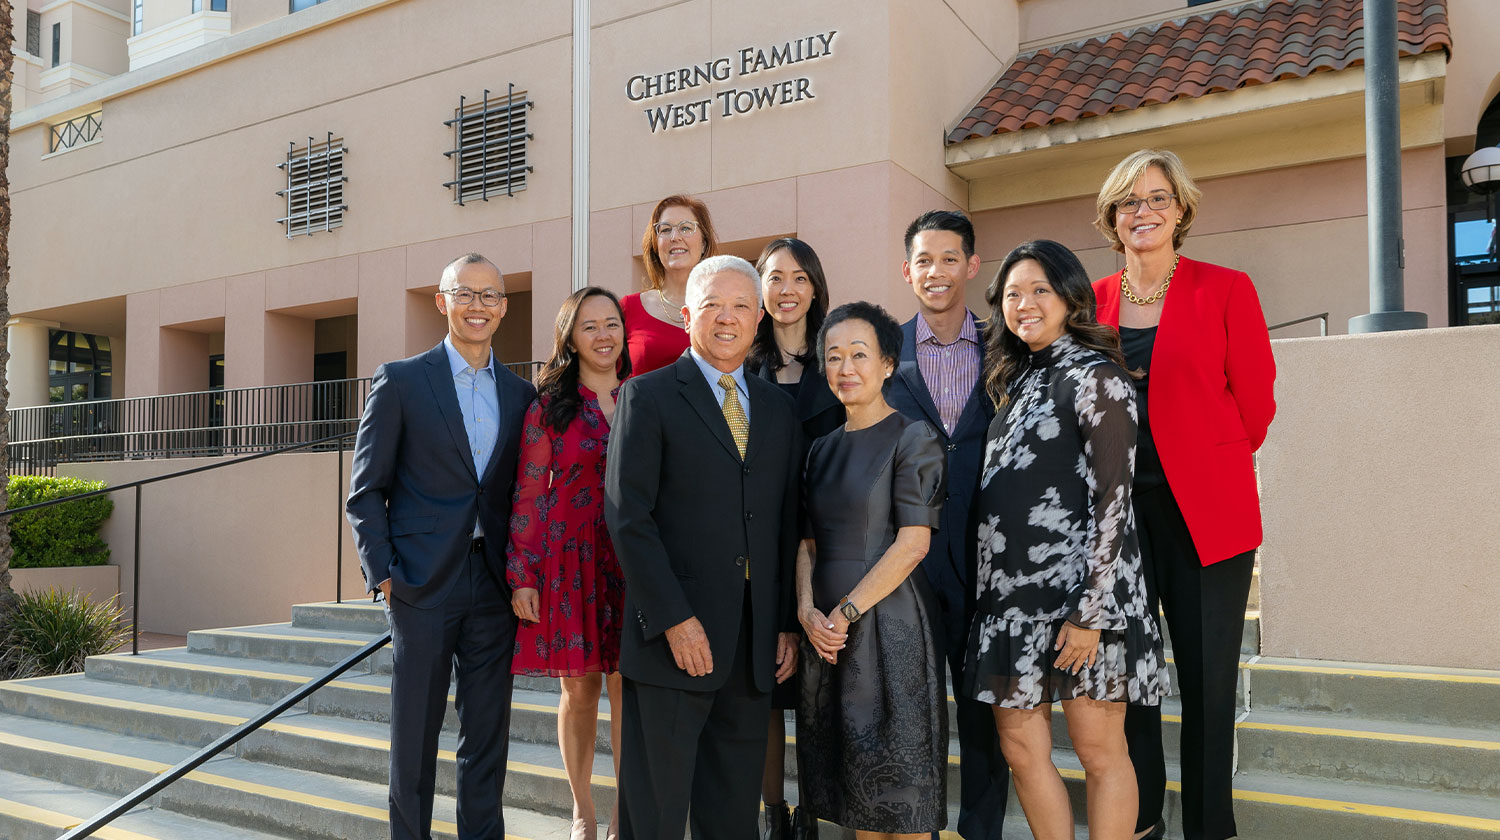 Andrew and Peggy Cherng make $25 million gift to Huntington Hospital